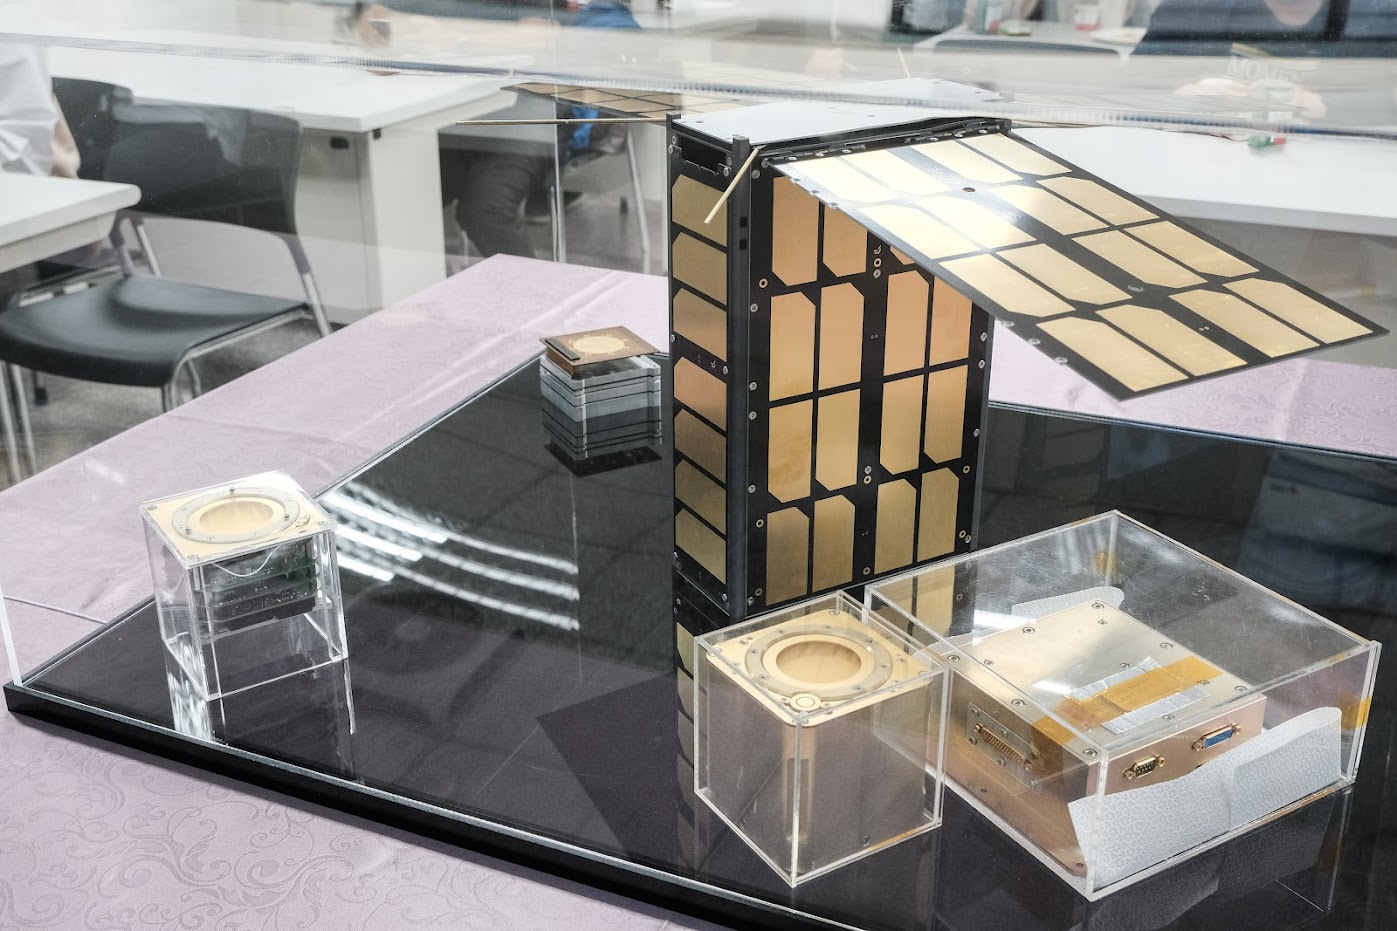 Models of CubeSat "PEARL" and the scientific payload of compact ionospheric probes (CIPs) were showcased. Photo by Huang Jun-Wei